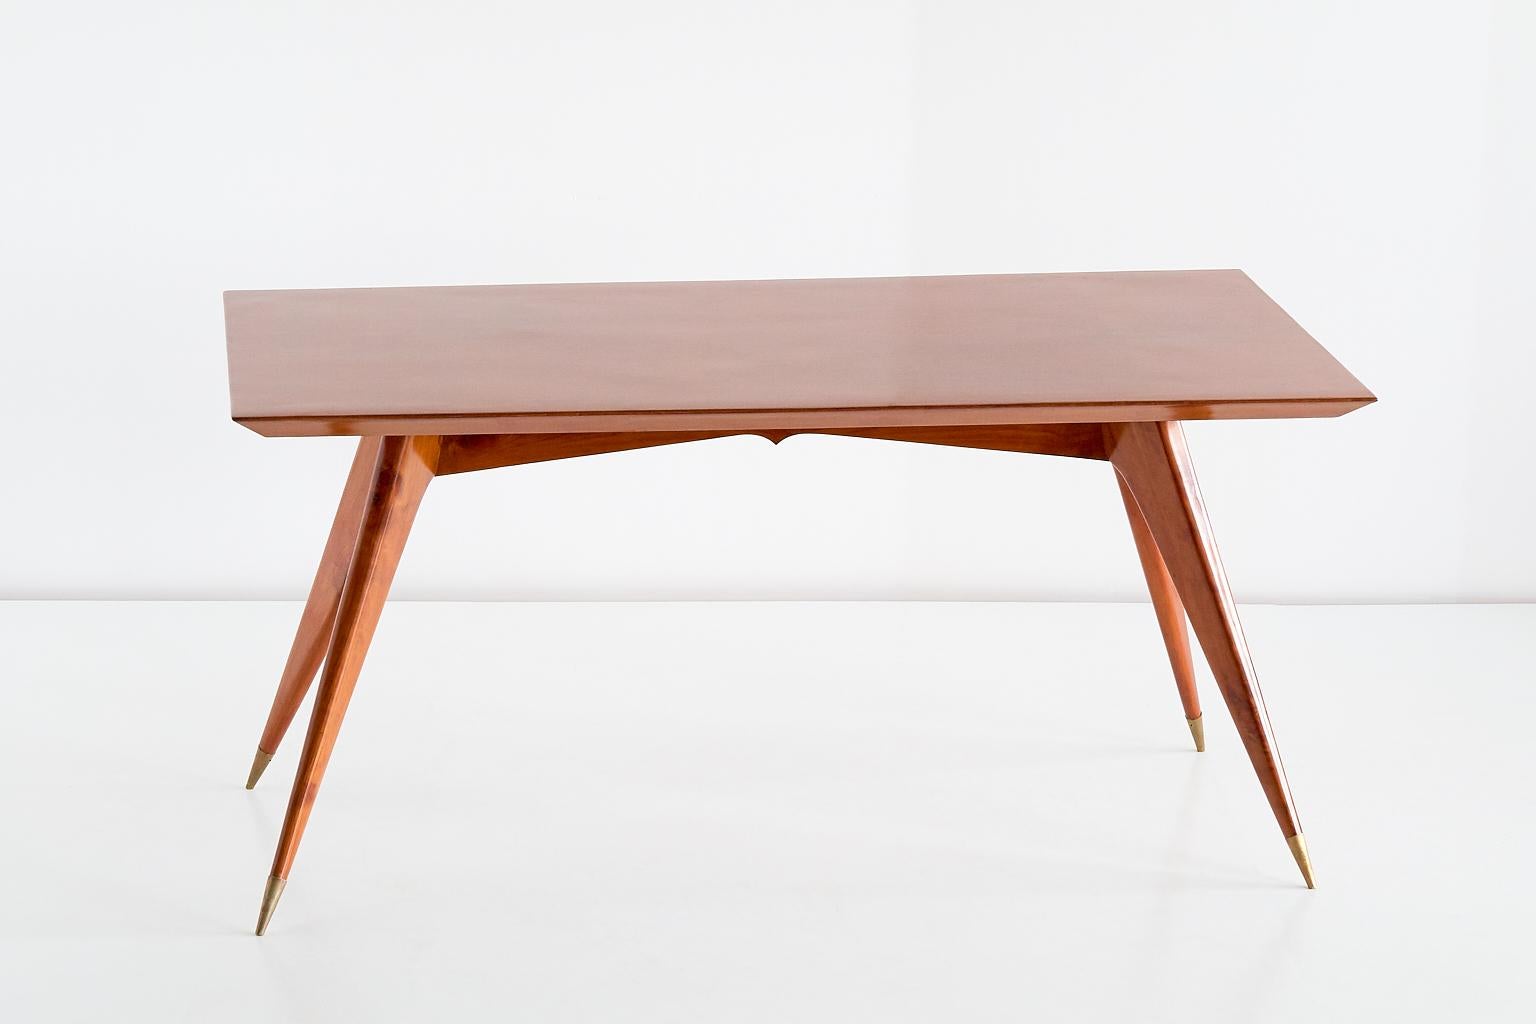 Metal Melchiorre Bega Dining Table in Walnut and Brass, Italy, Early 1950s